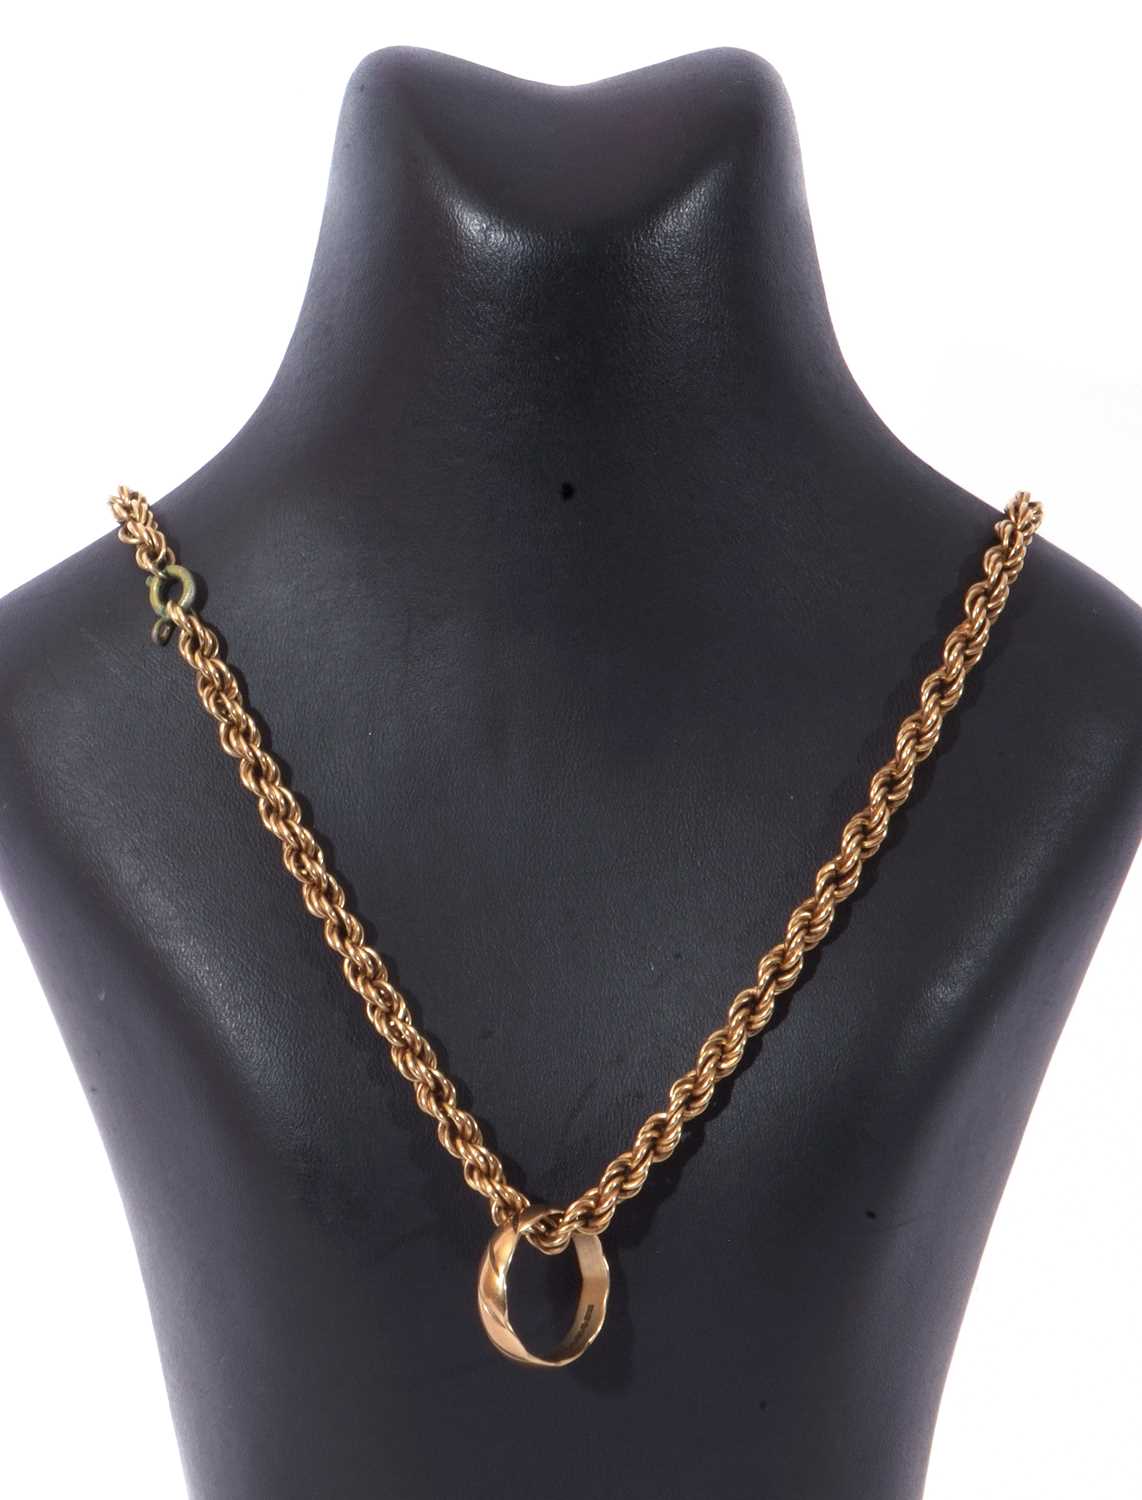 9ct gold rope twist chain (broken) suspending a 9ct gold ring, g/w 13.8gms